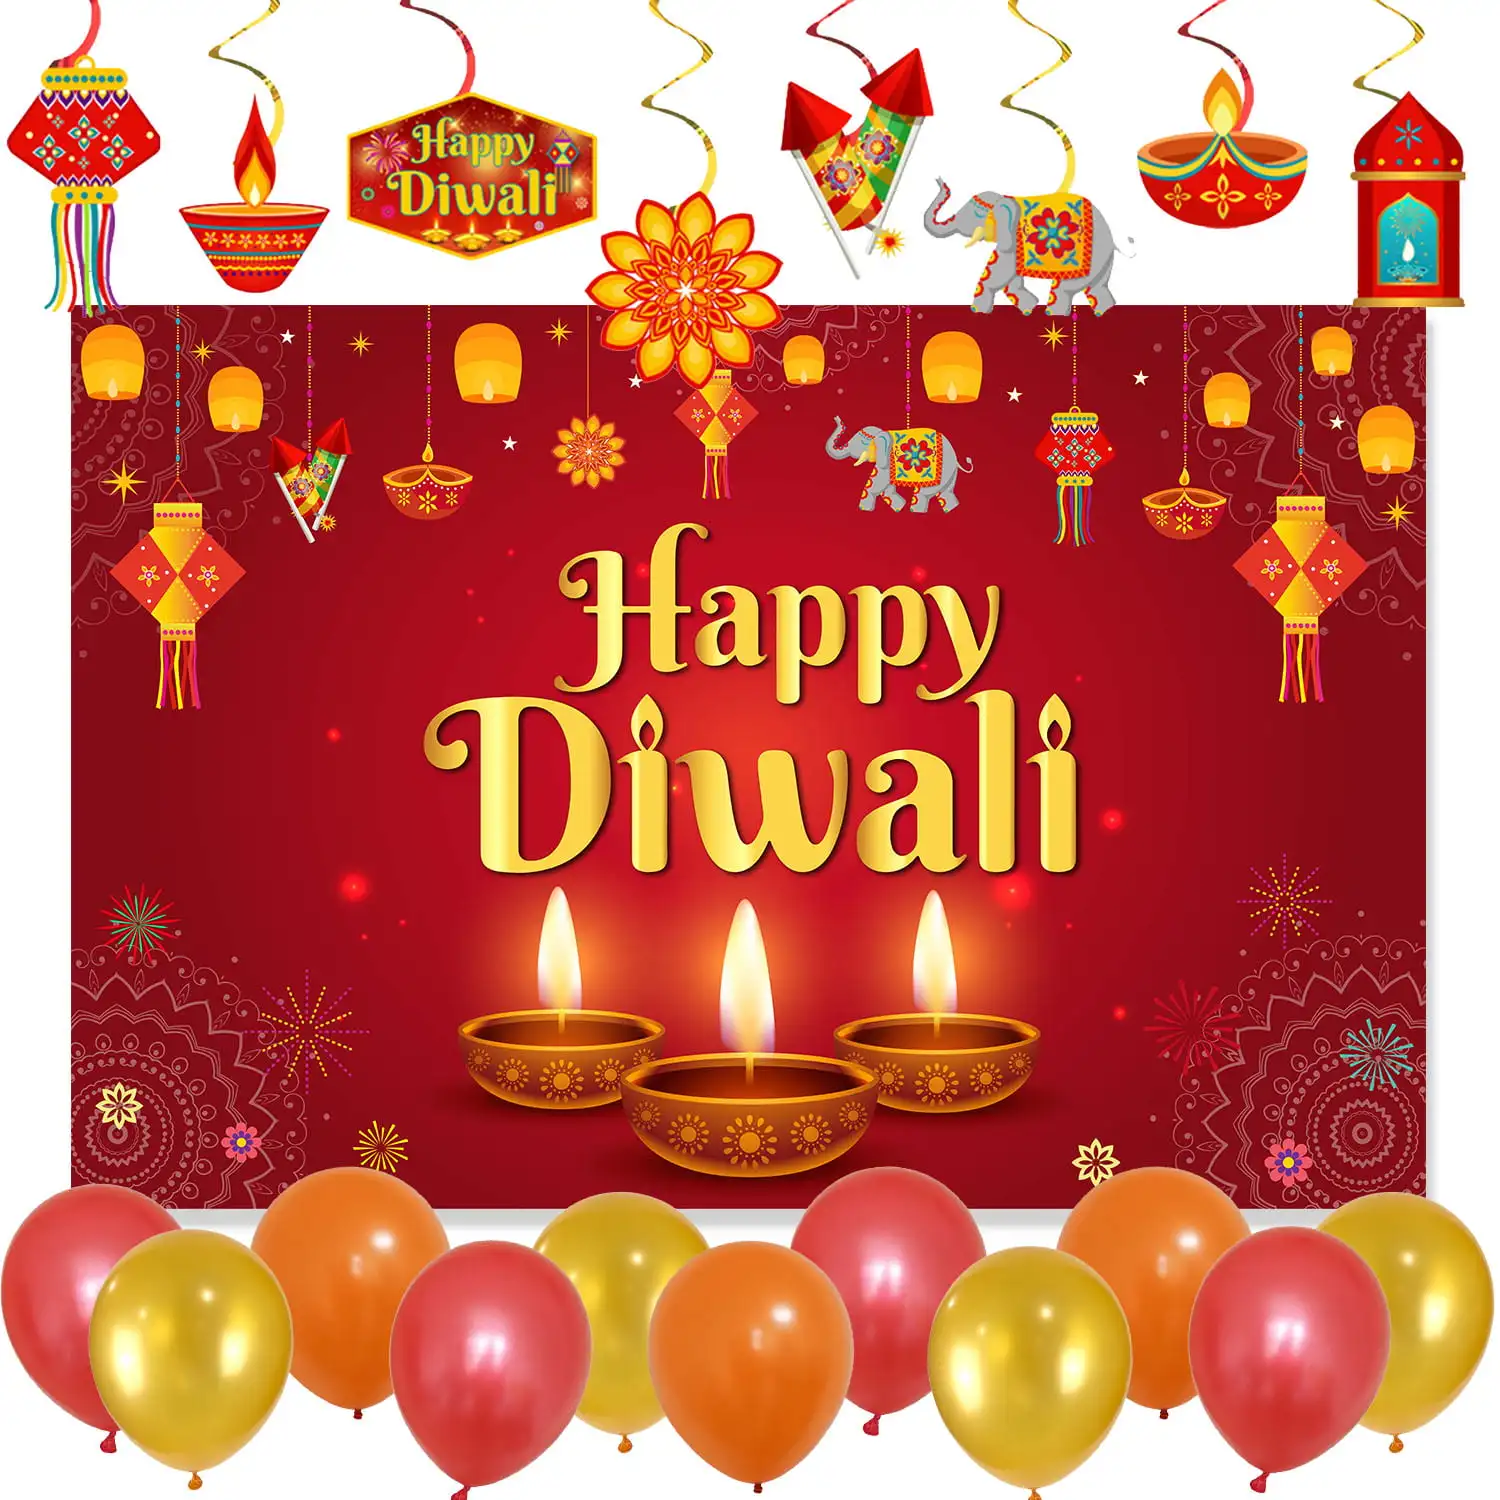 

Happy Diwali Backdrop with Lights, Candles Pattern, Red Gold Balloon, Hanging Swirls, Party Decorations Supplies